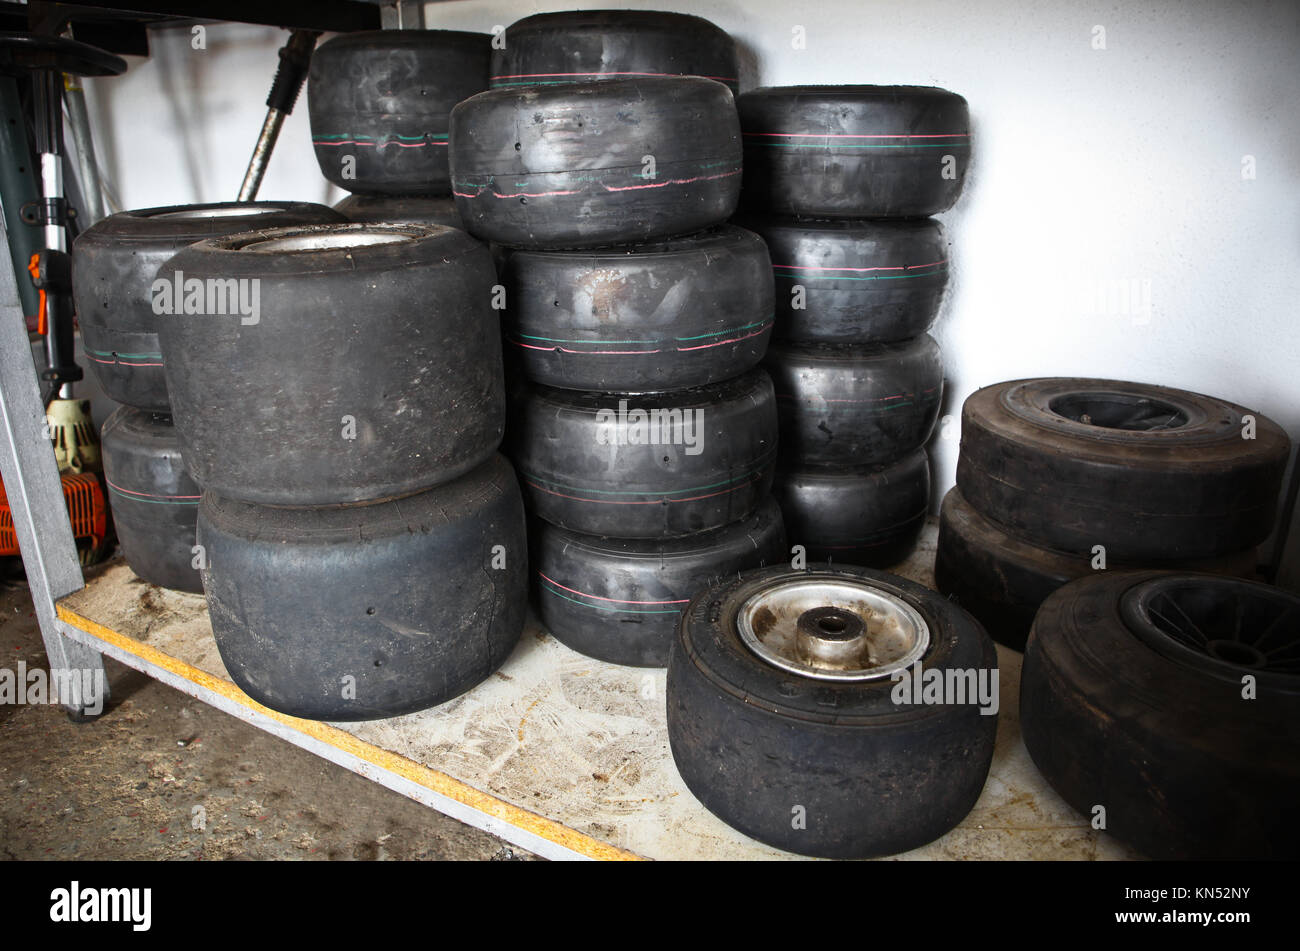 Loads of Karts wheels and tires after competition. Karting circuit workshop. Stock Photo